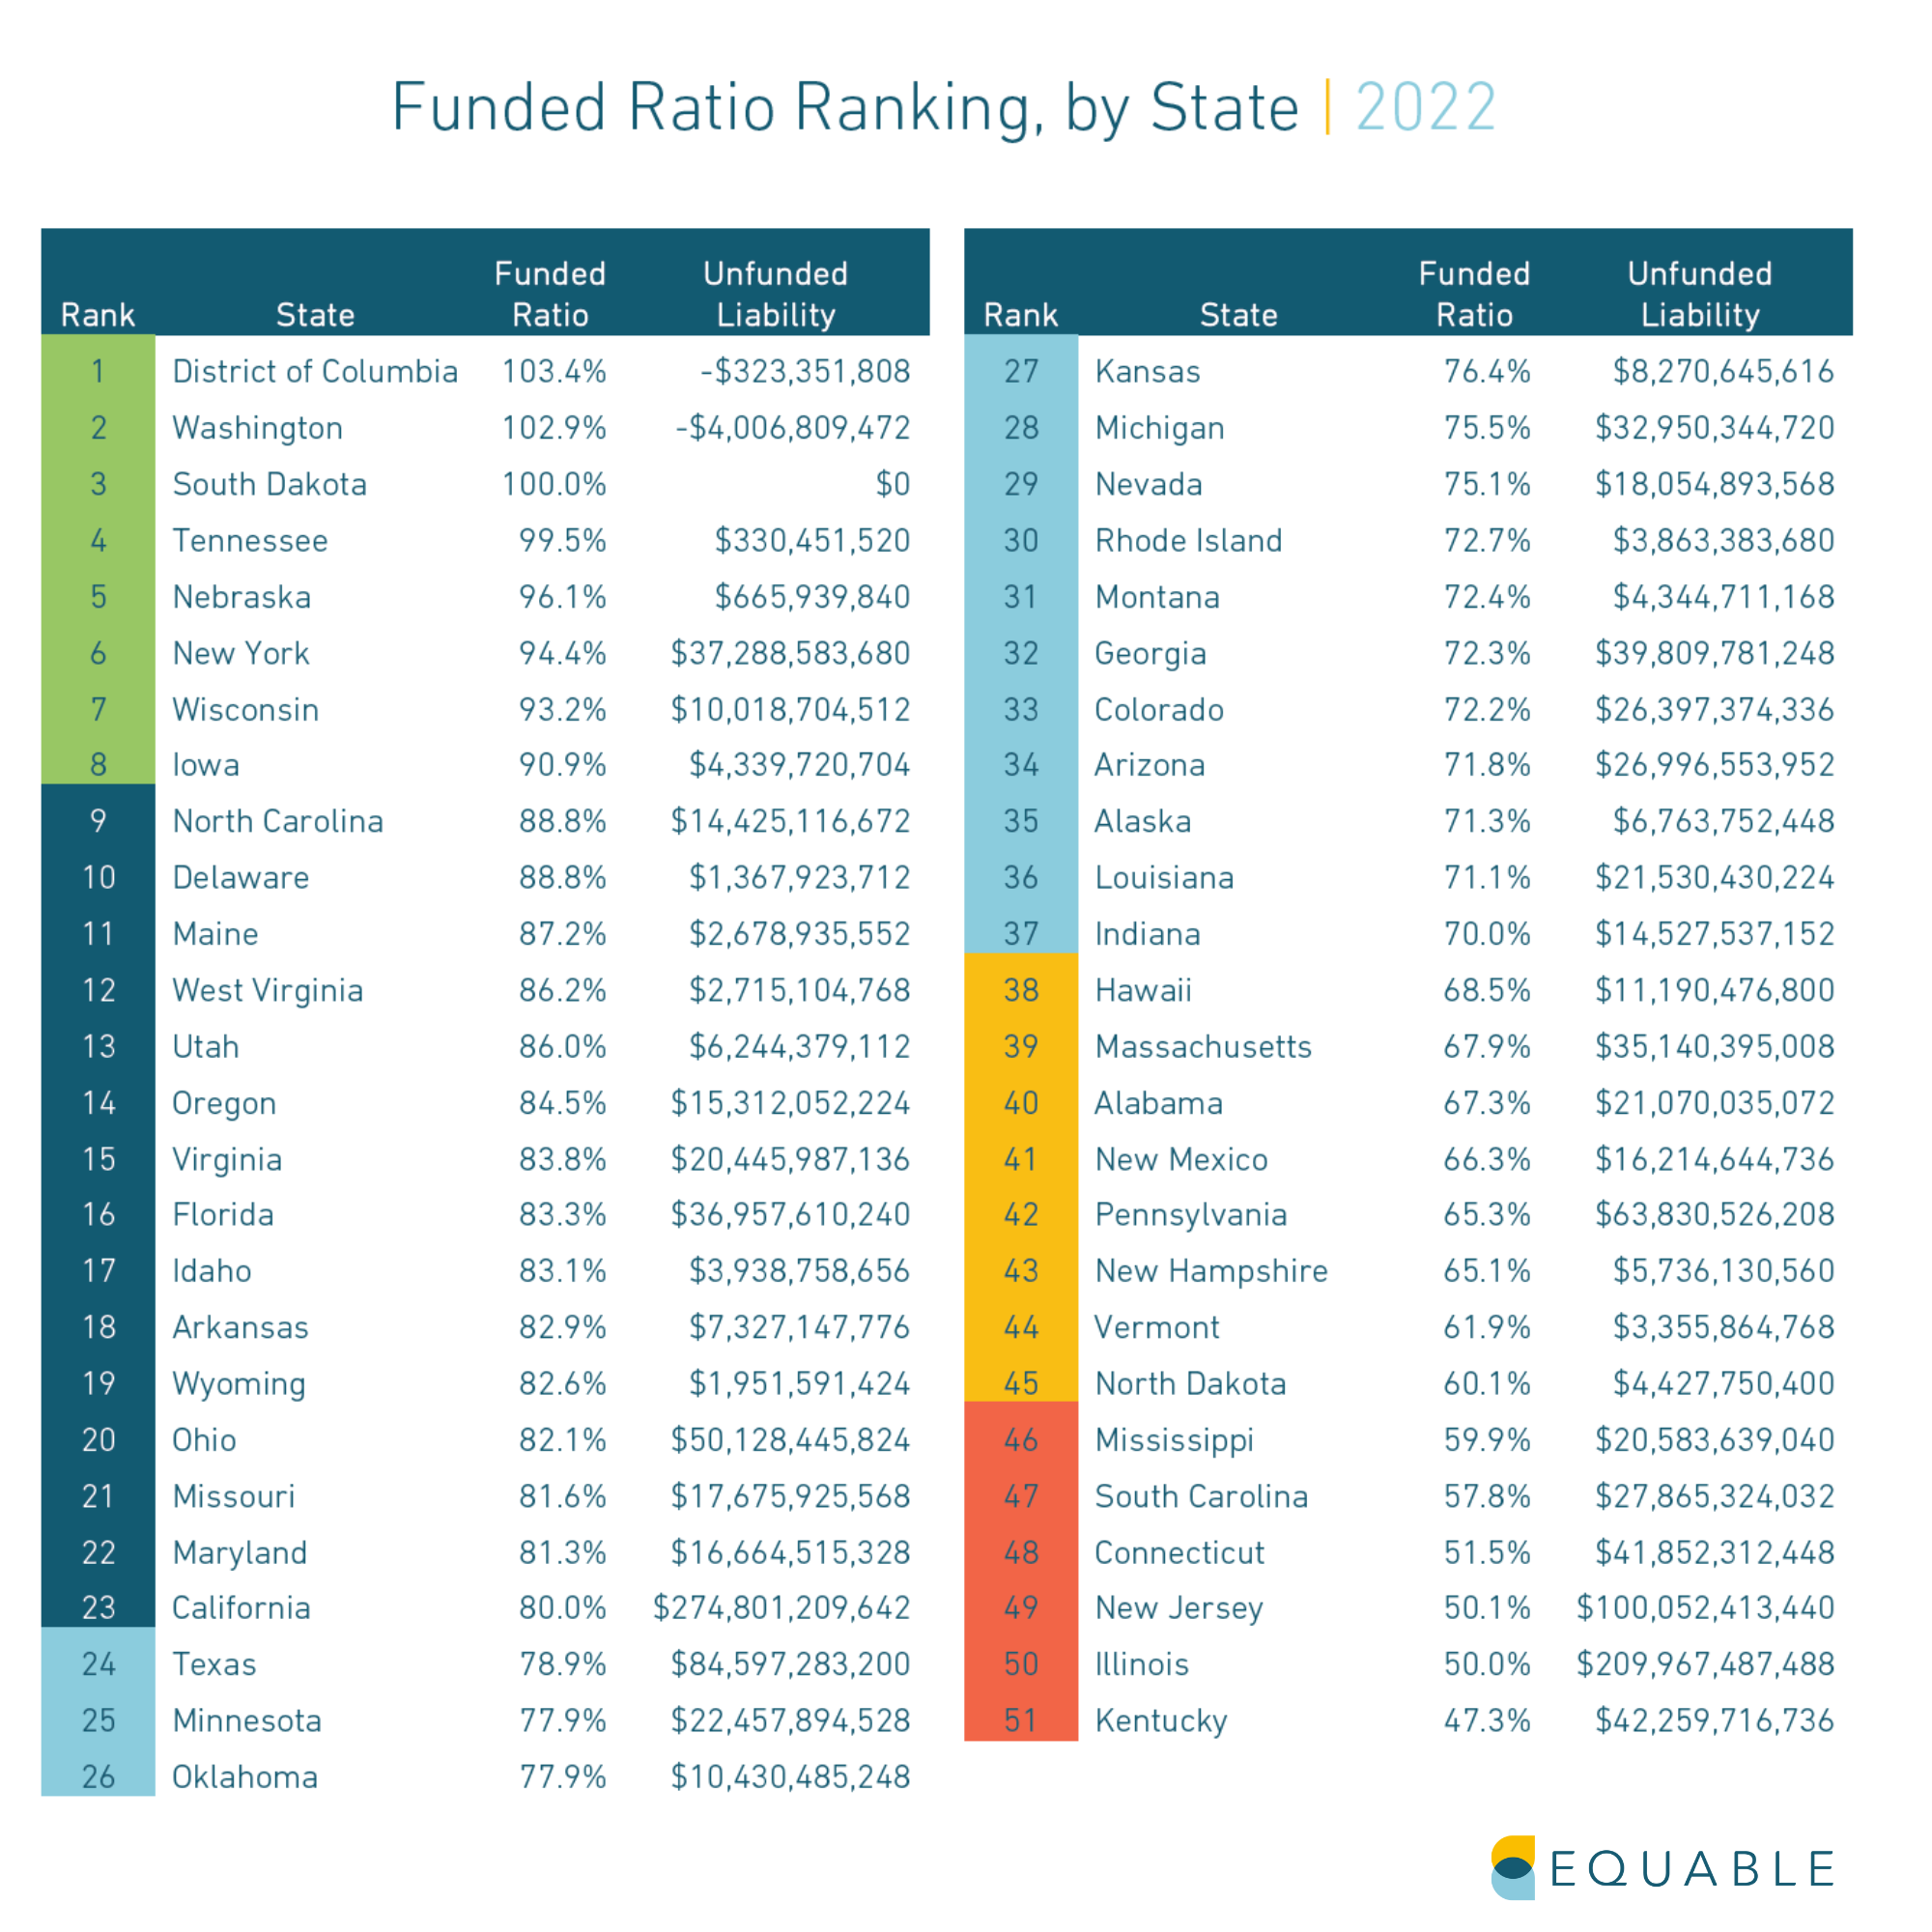 Chart shows a ranking of public pension funding ratios and unfunded liabilities by state for the 2022 year. 